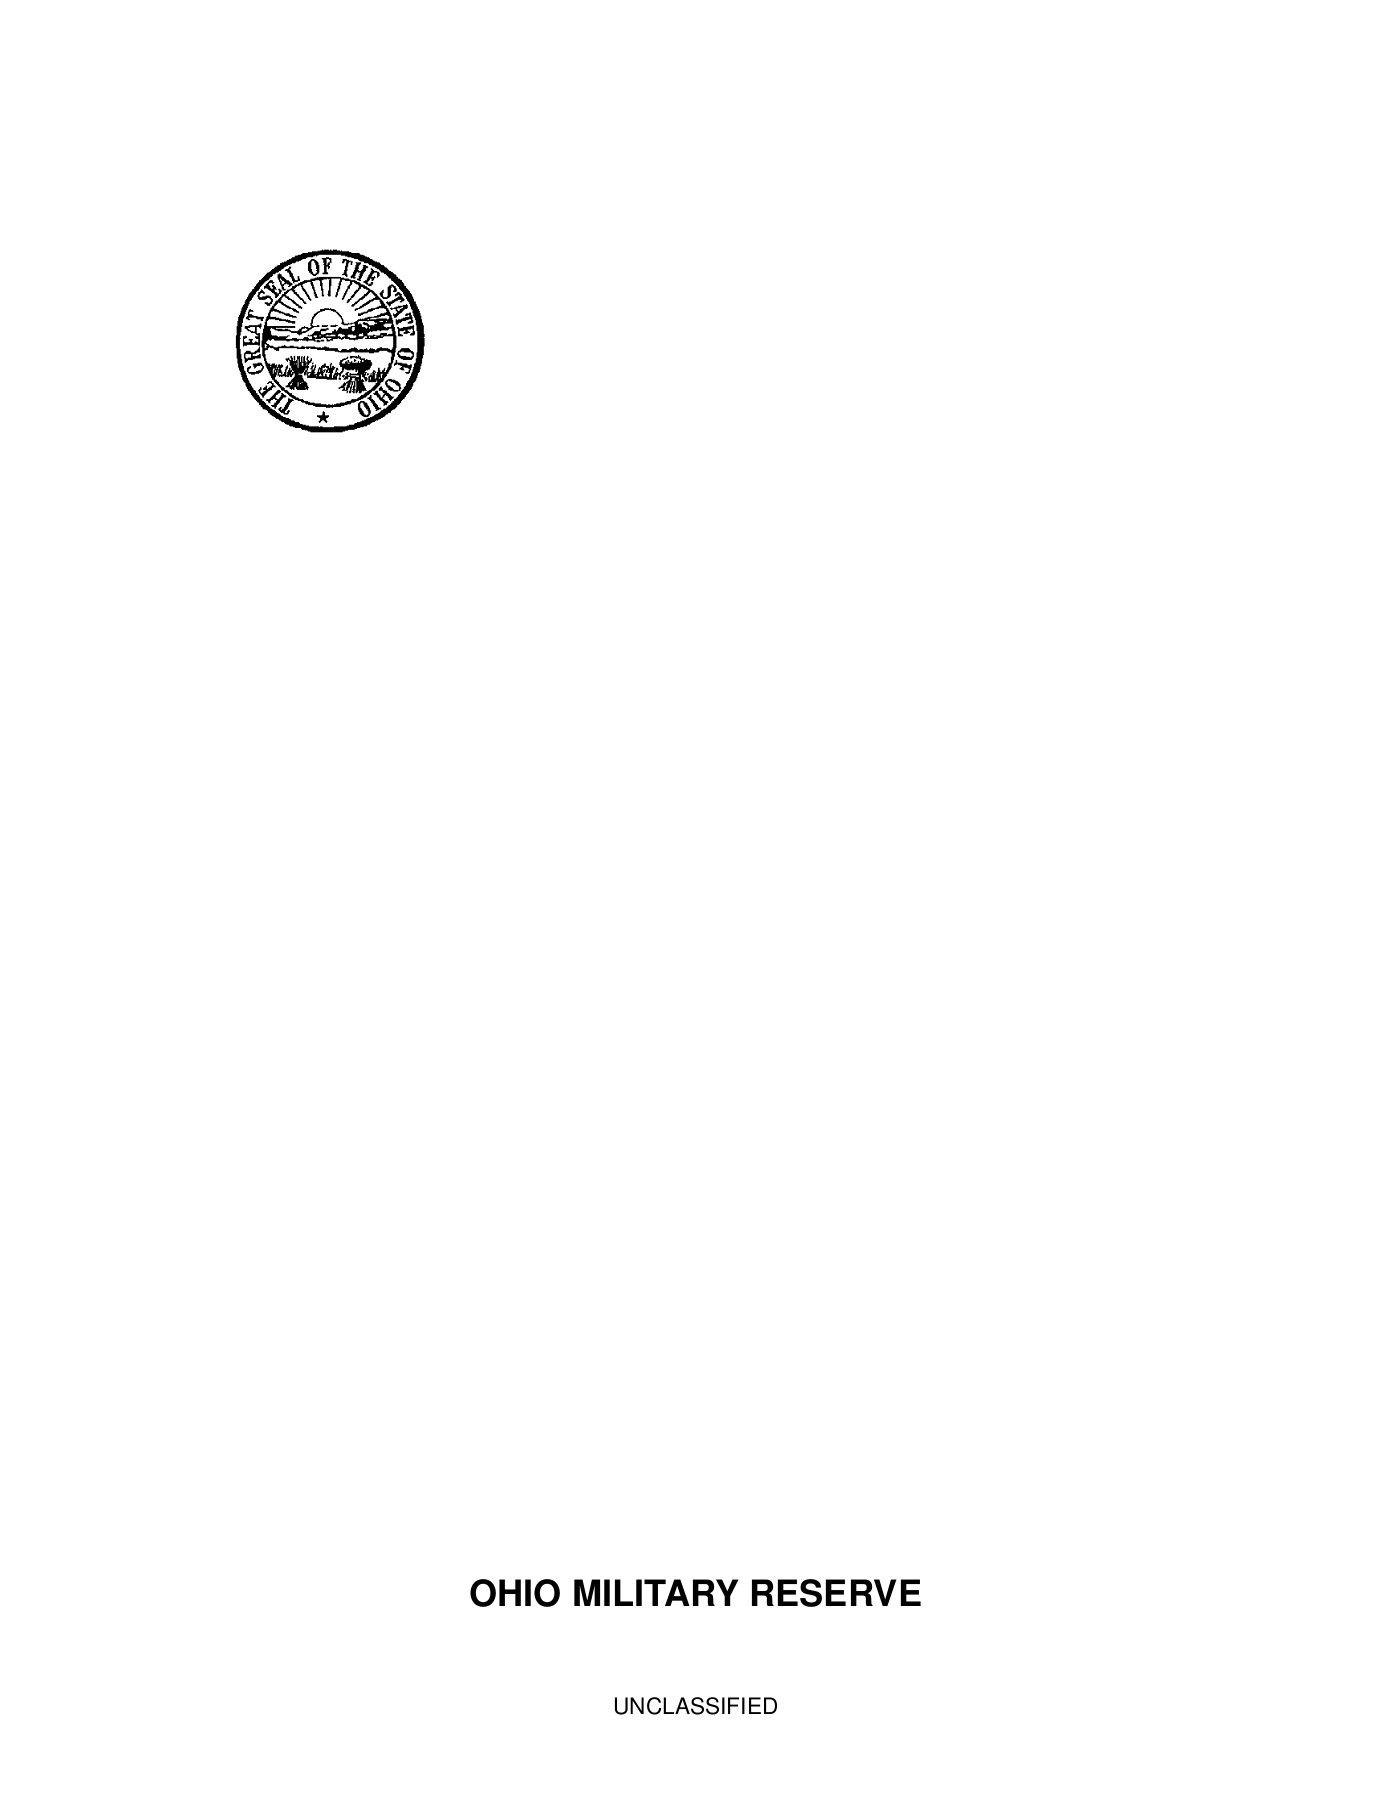 OHMR Logo - UNCLASSIFIED - Ohio Military Reserve Pages 1 - 7 - Text Version ...